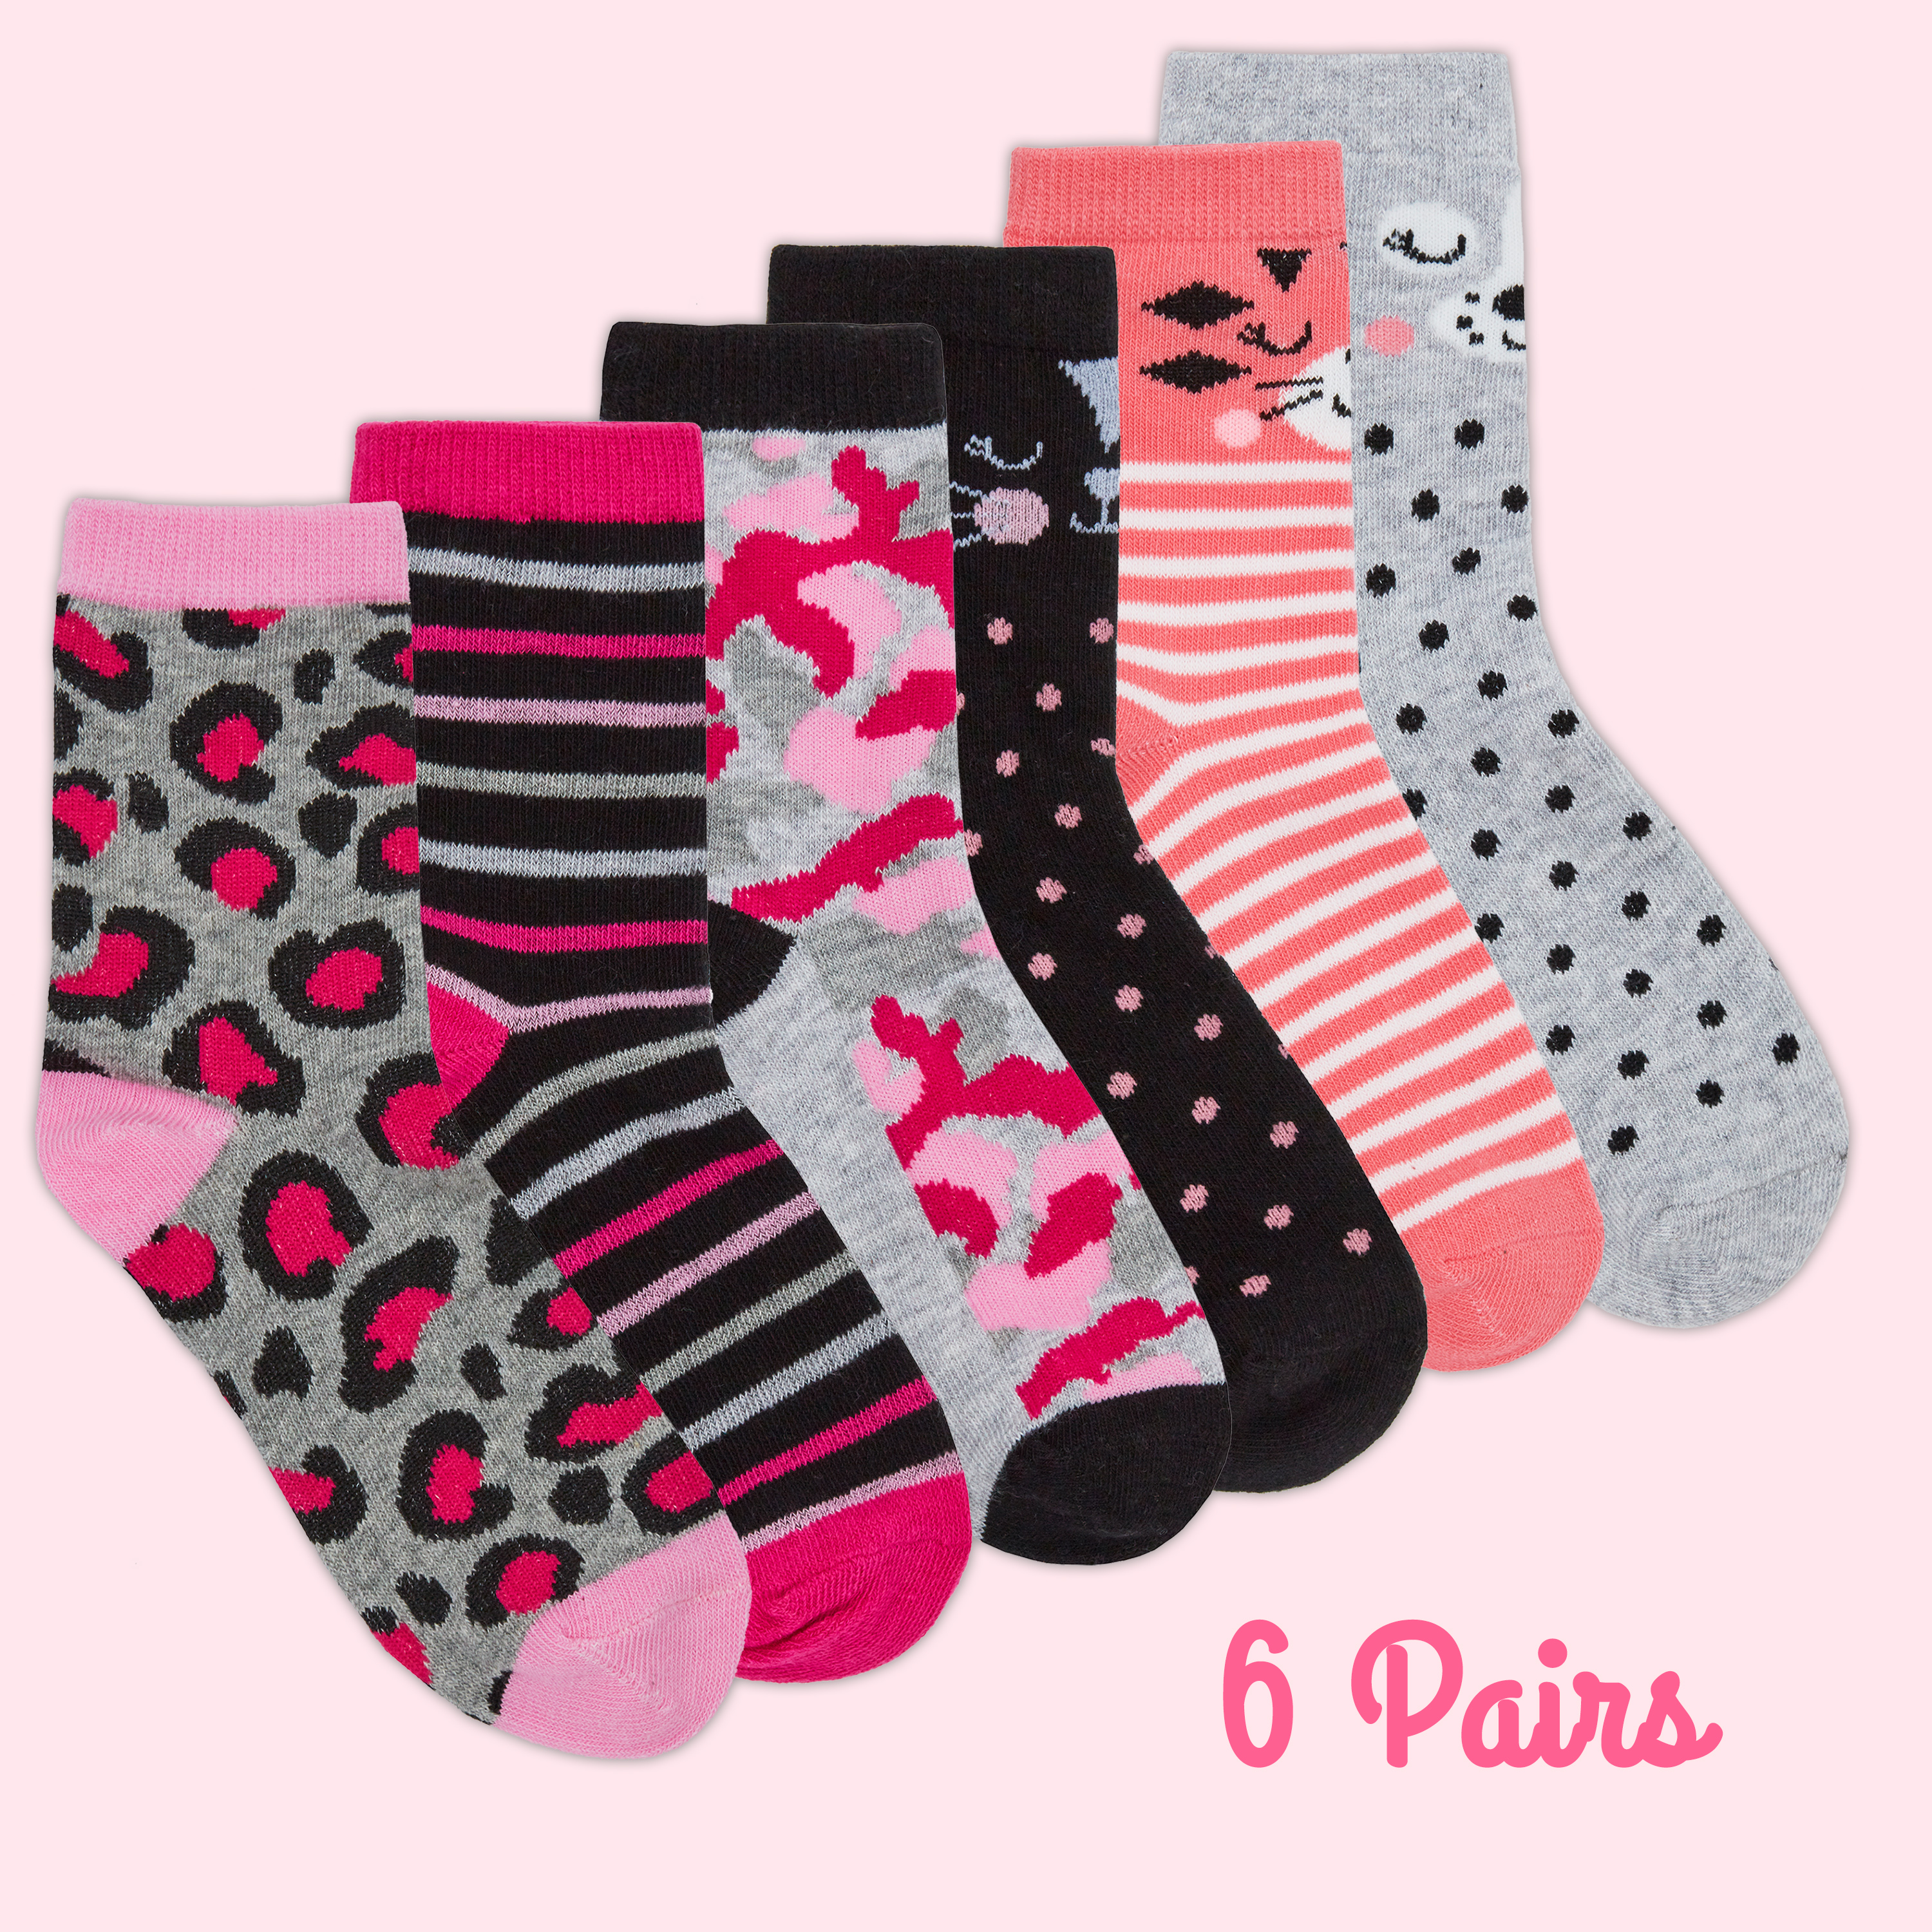 Girls/Kids 3-12 Socks Pair Pack COTTON RICH EVERYDAY Casual School Design Animal MULTIPACK Novelty Fun Character 6-8.5 9-12 12.5-3.5 